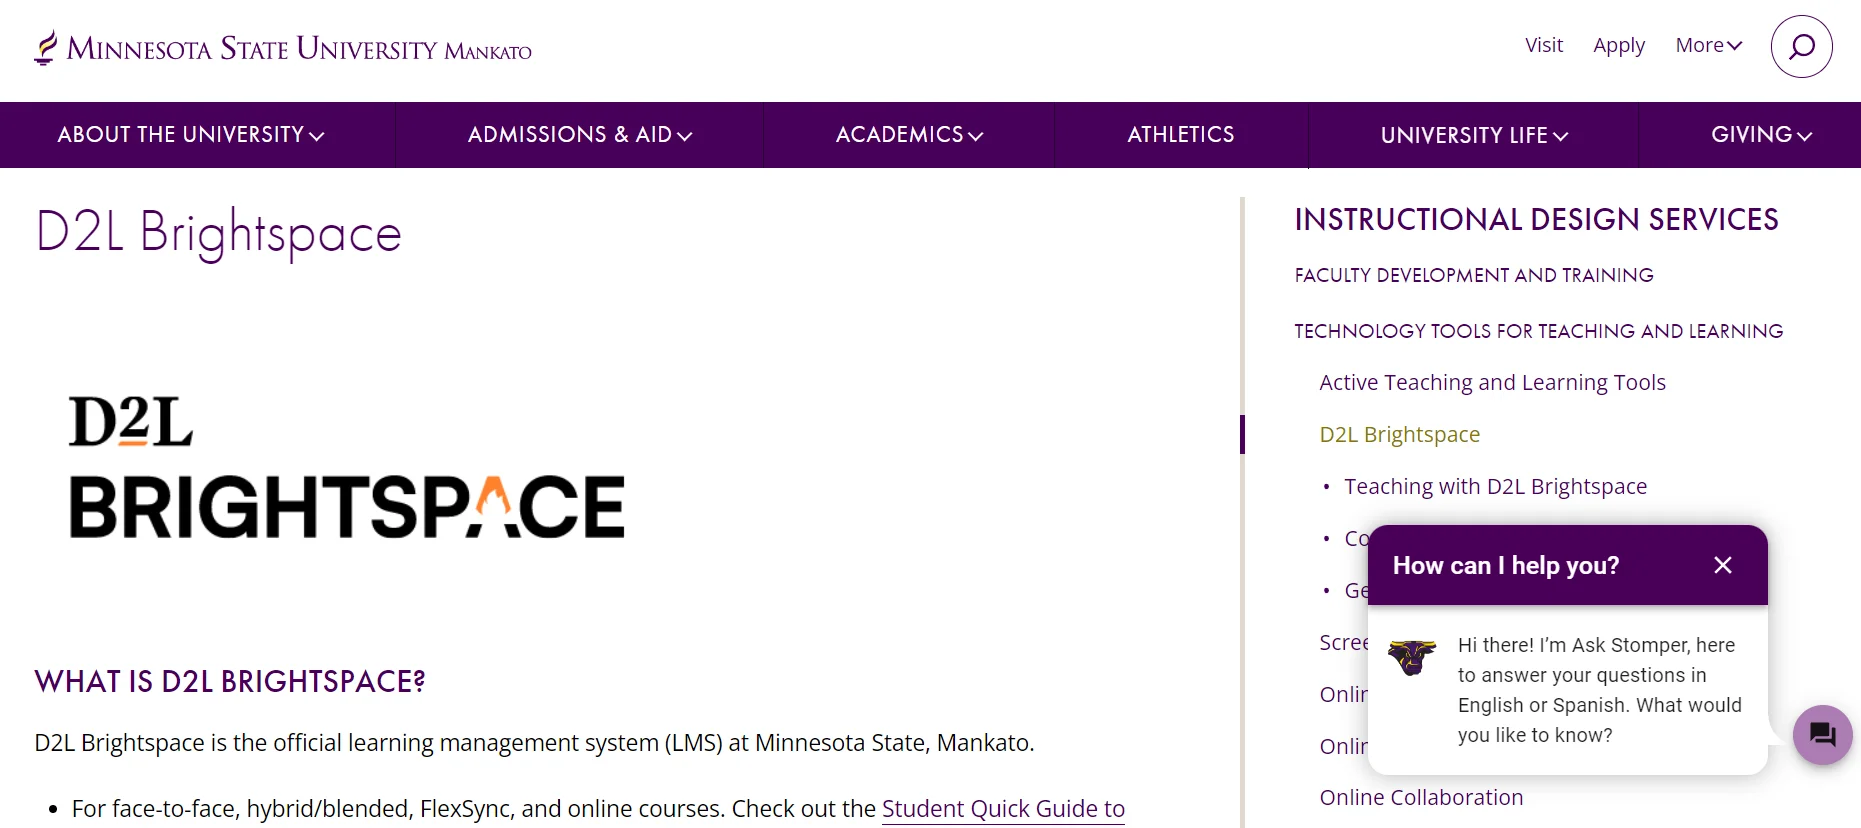 Key Features of D2L MNSU